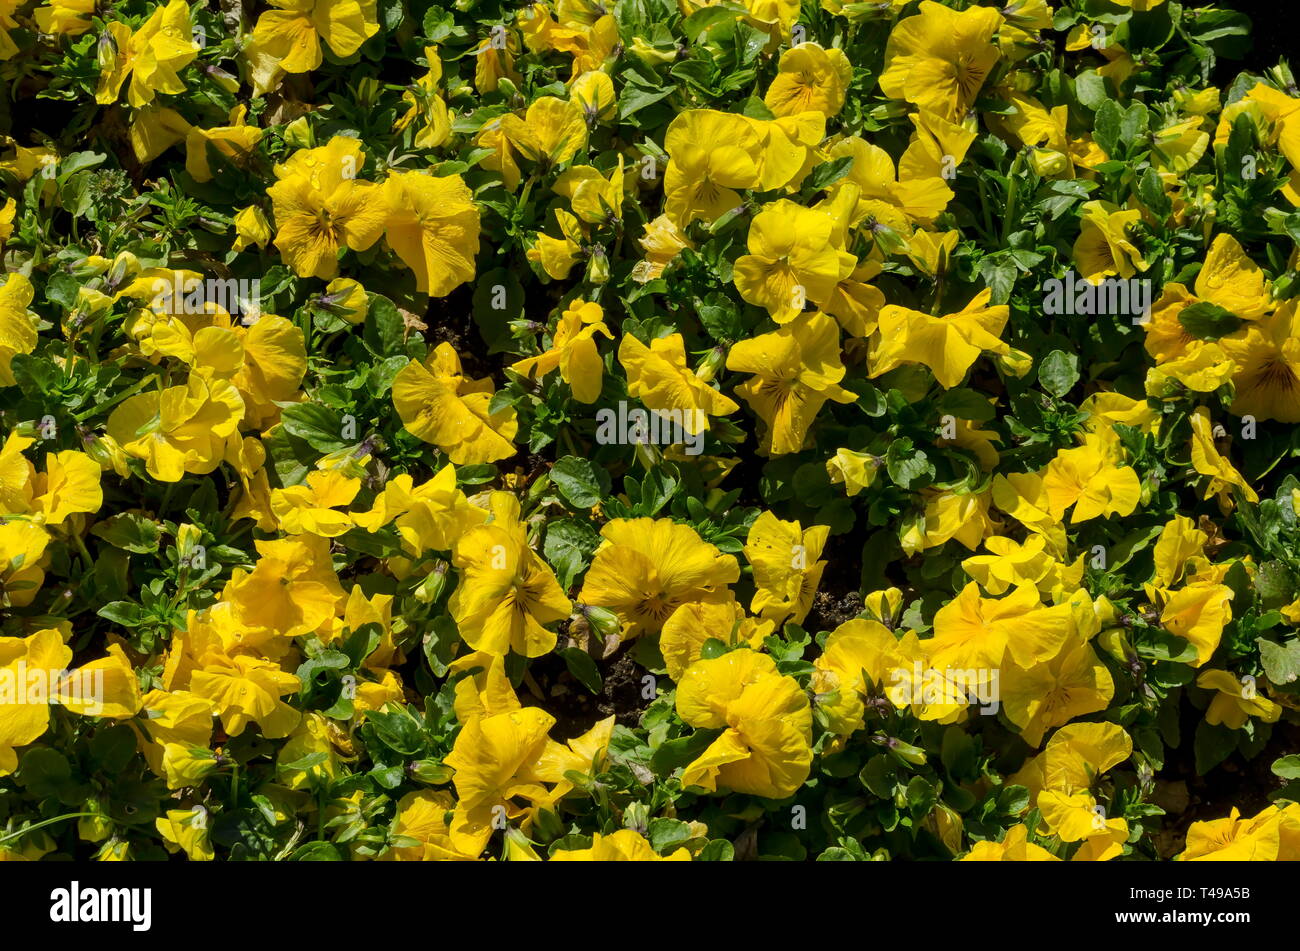 Natural background of spring blooming fragrant yellow pansies or Viola altaica in garden, Sofia, Bulgaria Stock Photo